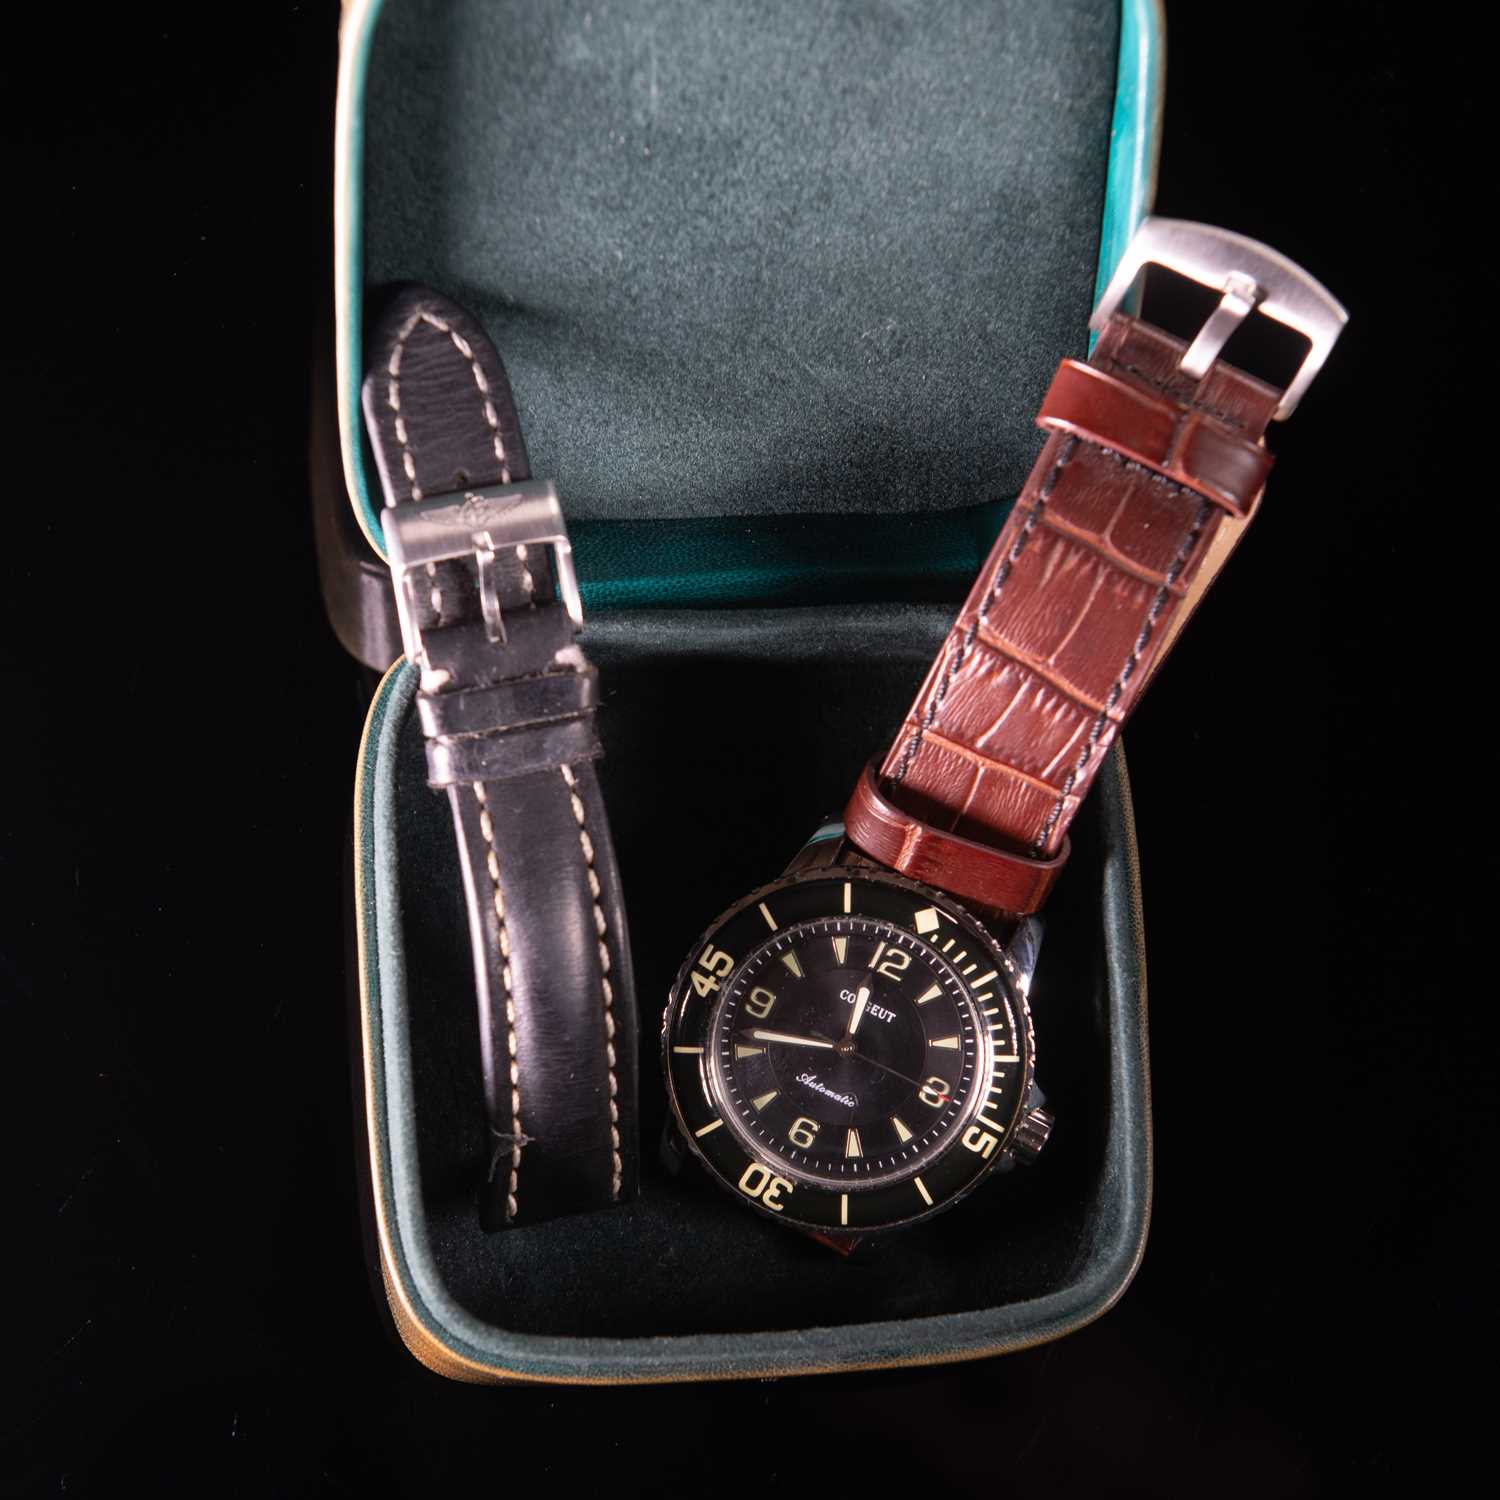 A GENTS STEEL COURGEUT AUTOMATIC STRAP WATCH - Image 2 of 2